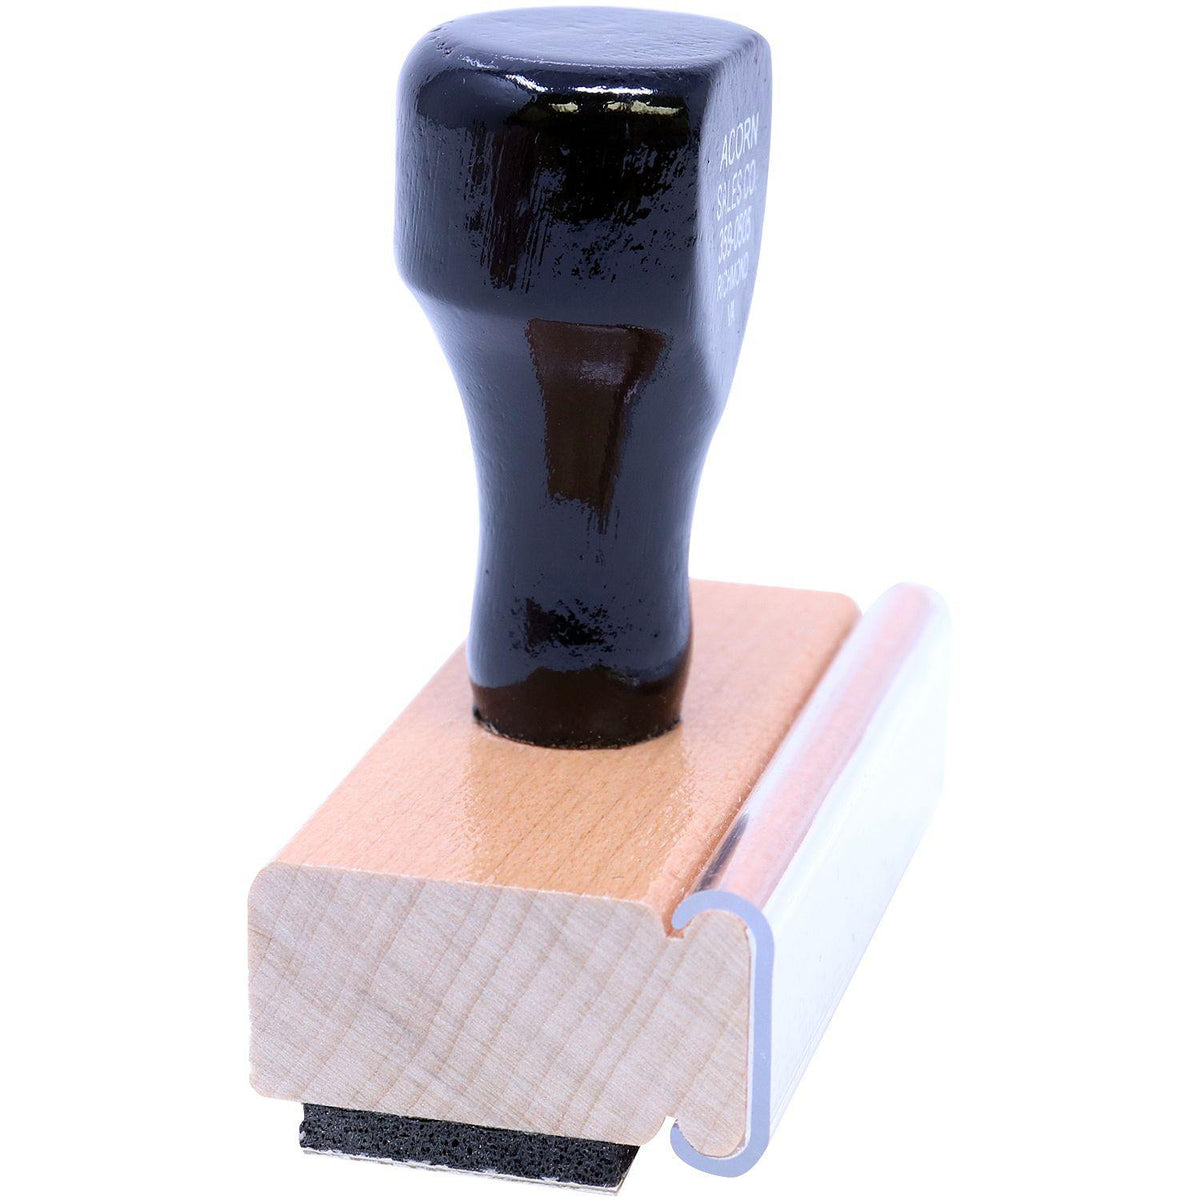 Read and Route with Lines Rubber Stamp - Engineer Seal Stamps - Brand_Acorn, Impression Size_Small, Stamp Type_Regular Stamp, Type of Use_General, Type of Use_Office